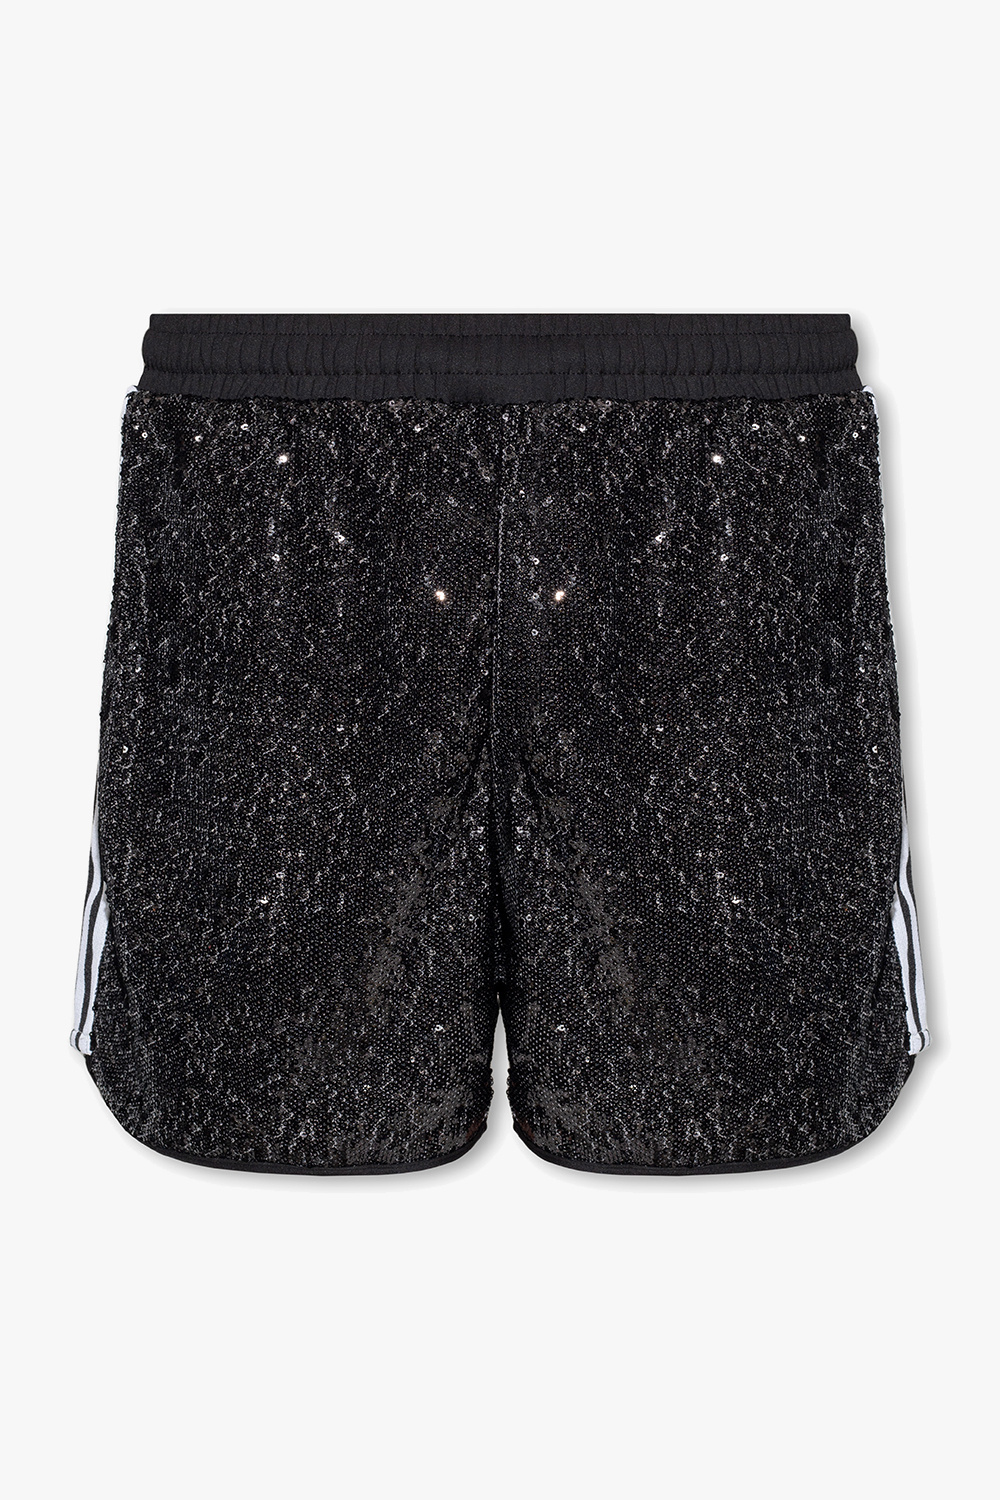 ADIDAS Originals Sequinned shorts ‘Blue Version’ collection